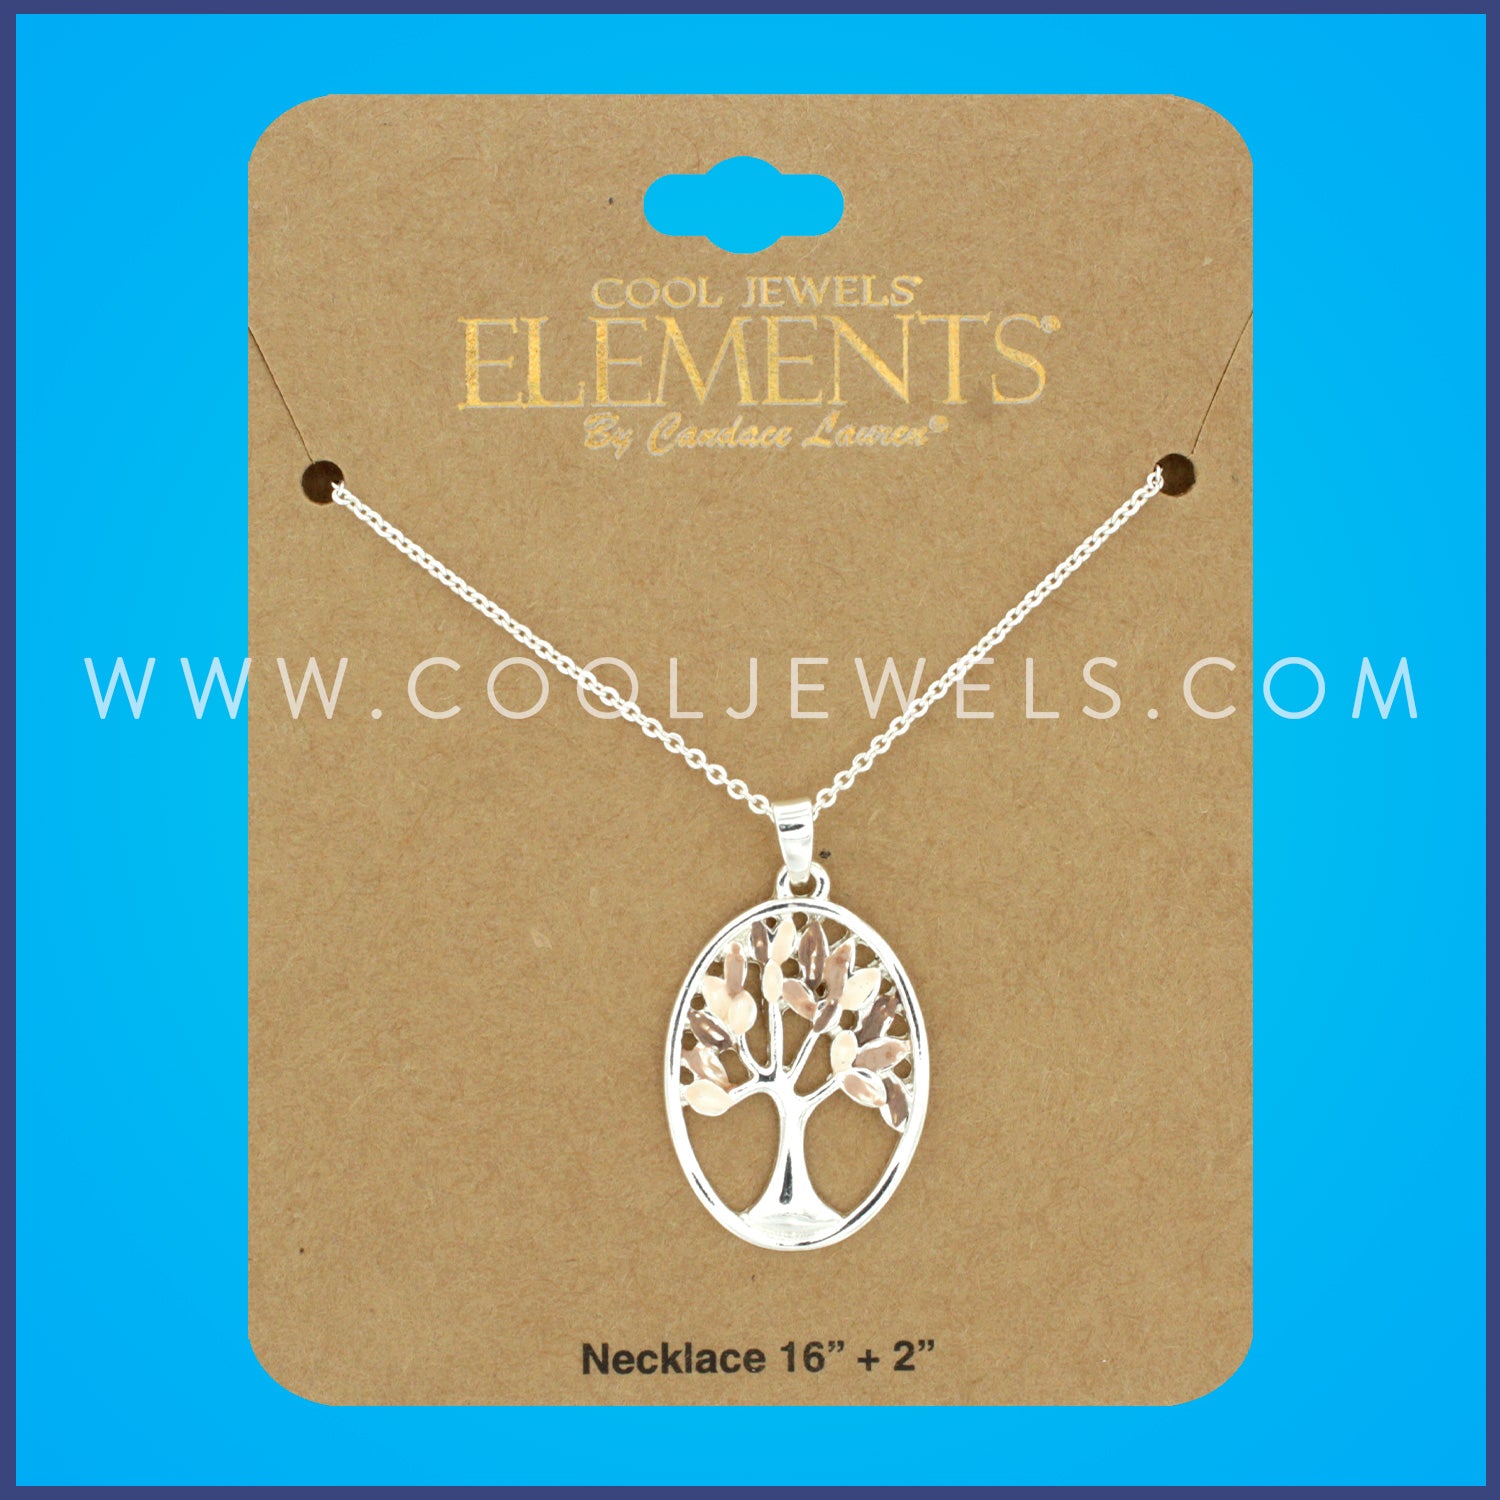 SILVER CHAIN NECKLACE WITH OVAL TREE PENDANT - CARDED